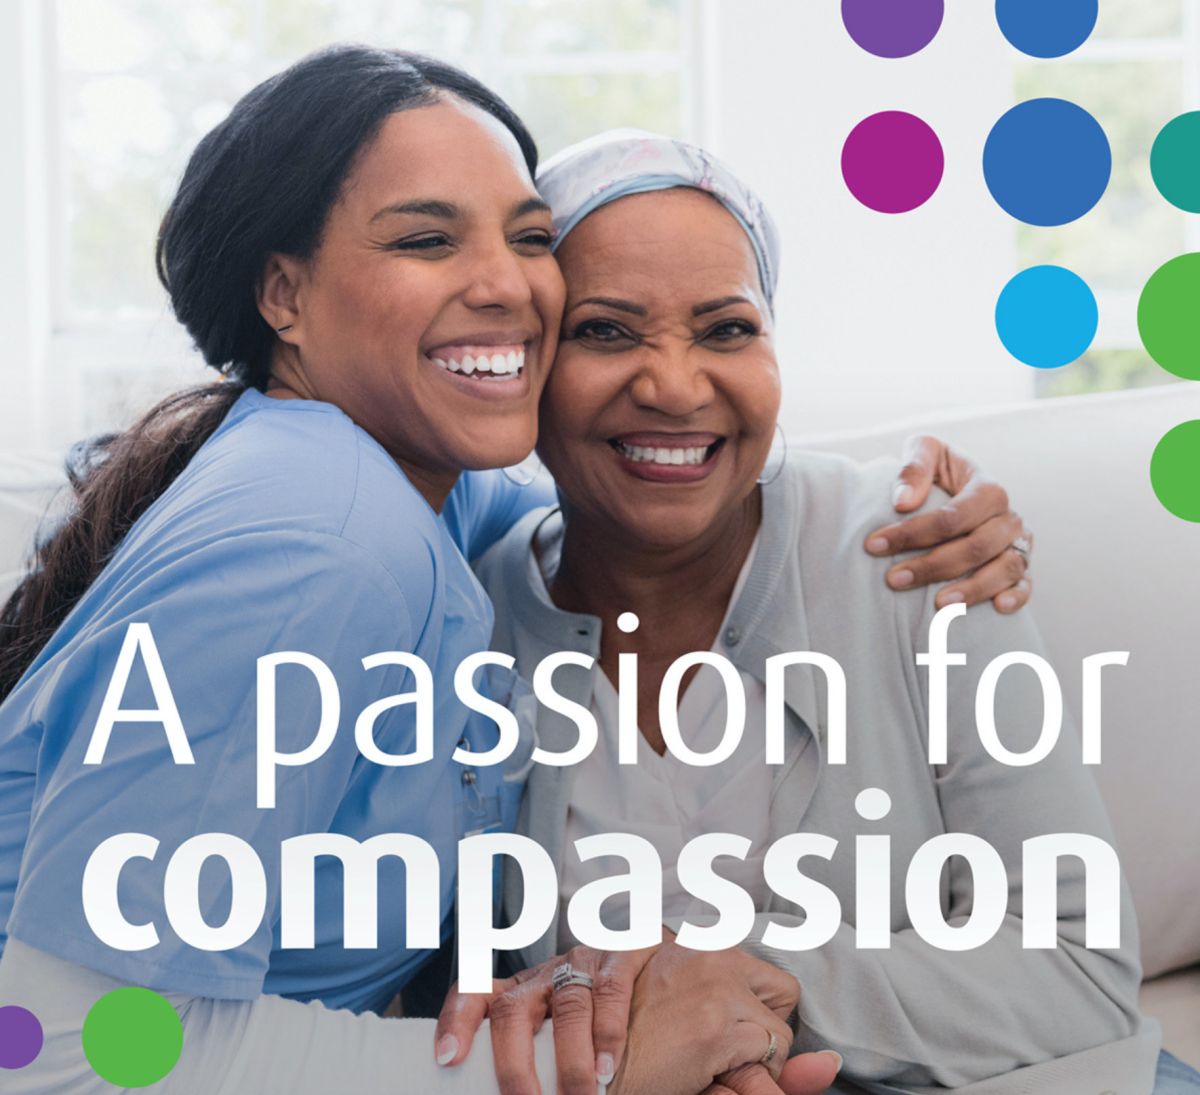 A passion for compassion graphic with African American medical professional hugging patient